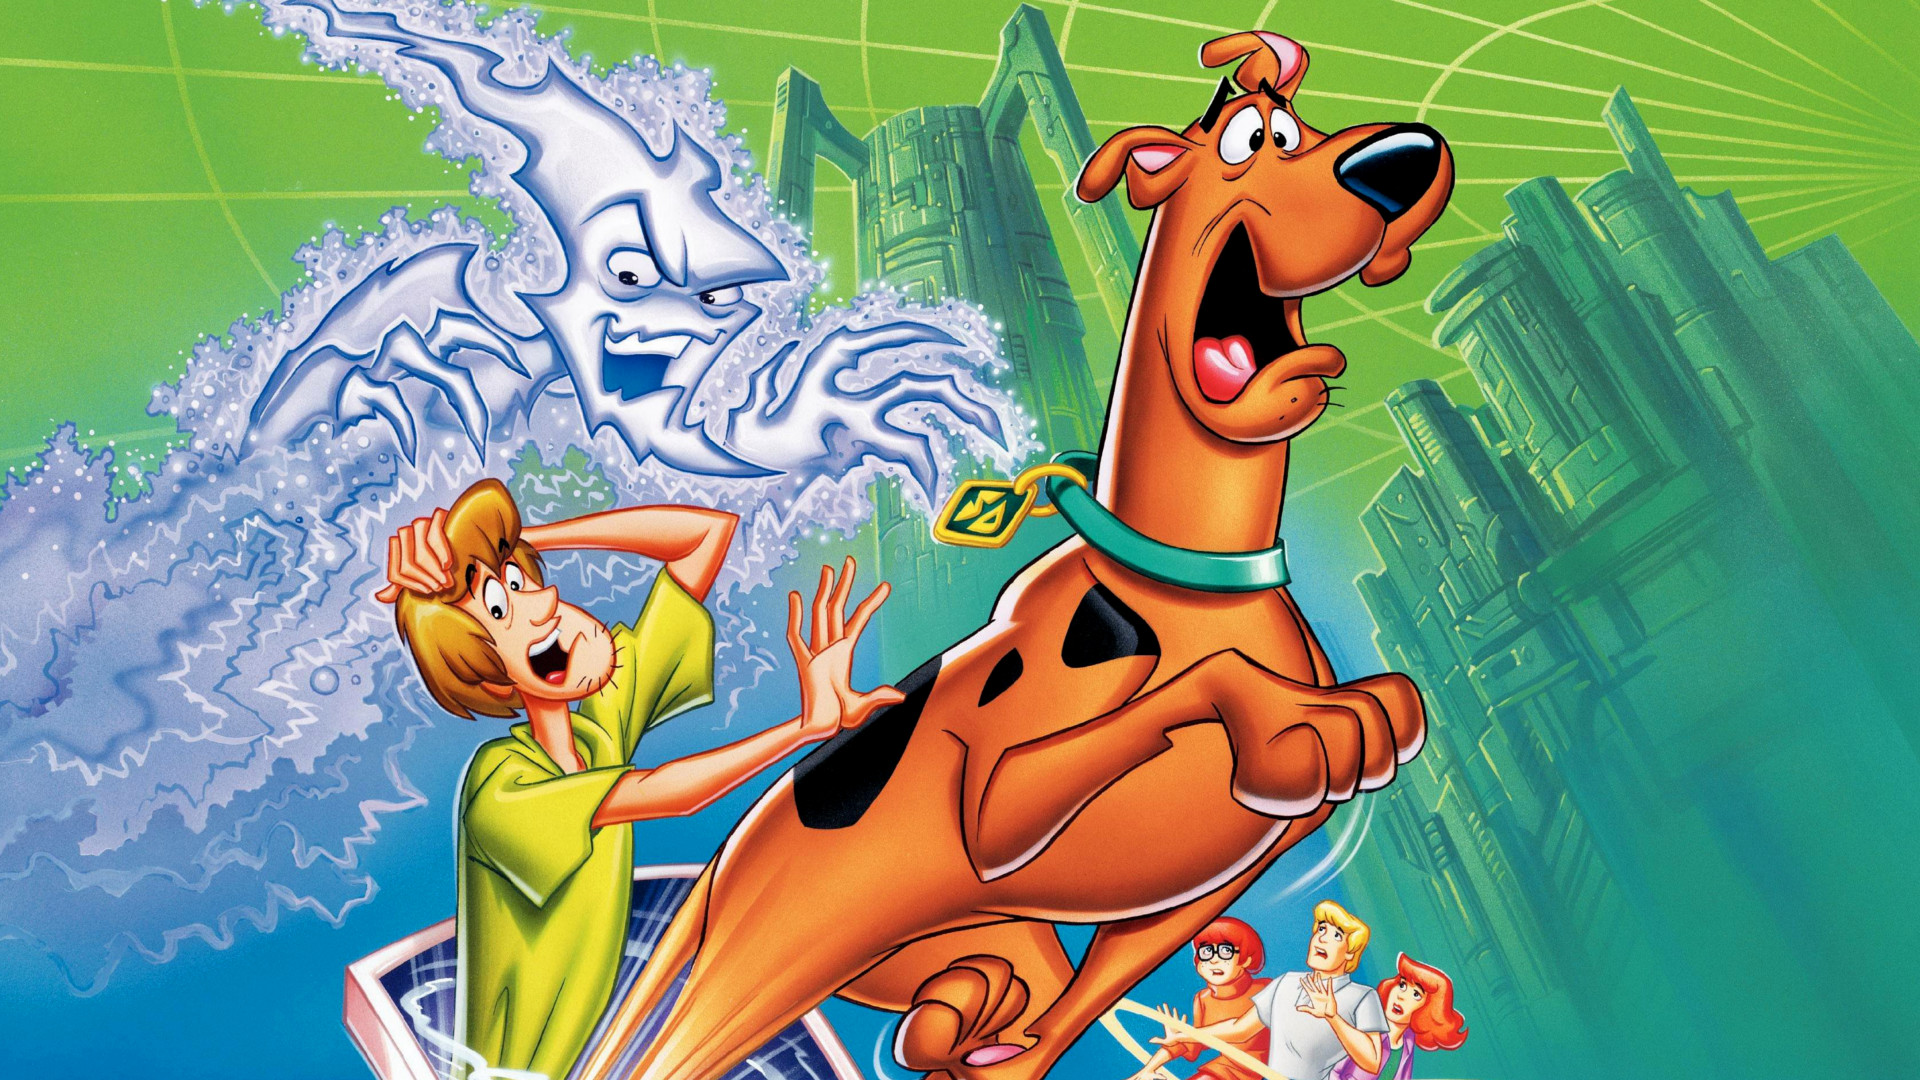 velma dinkley, movie, scooby doo and the cyber chase, daphne blake, fred jones, scooby doo, shaggy rogers